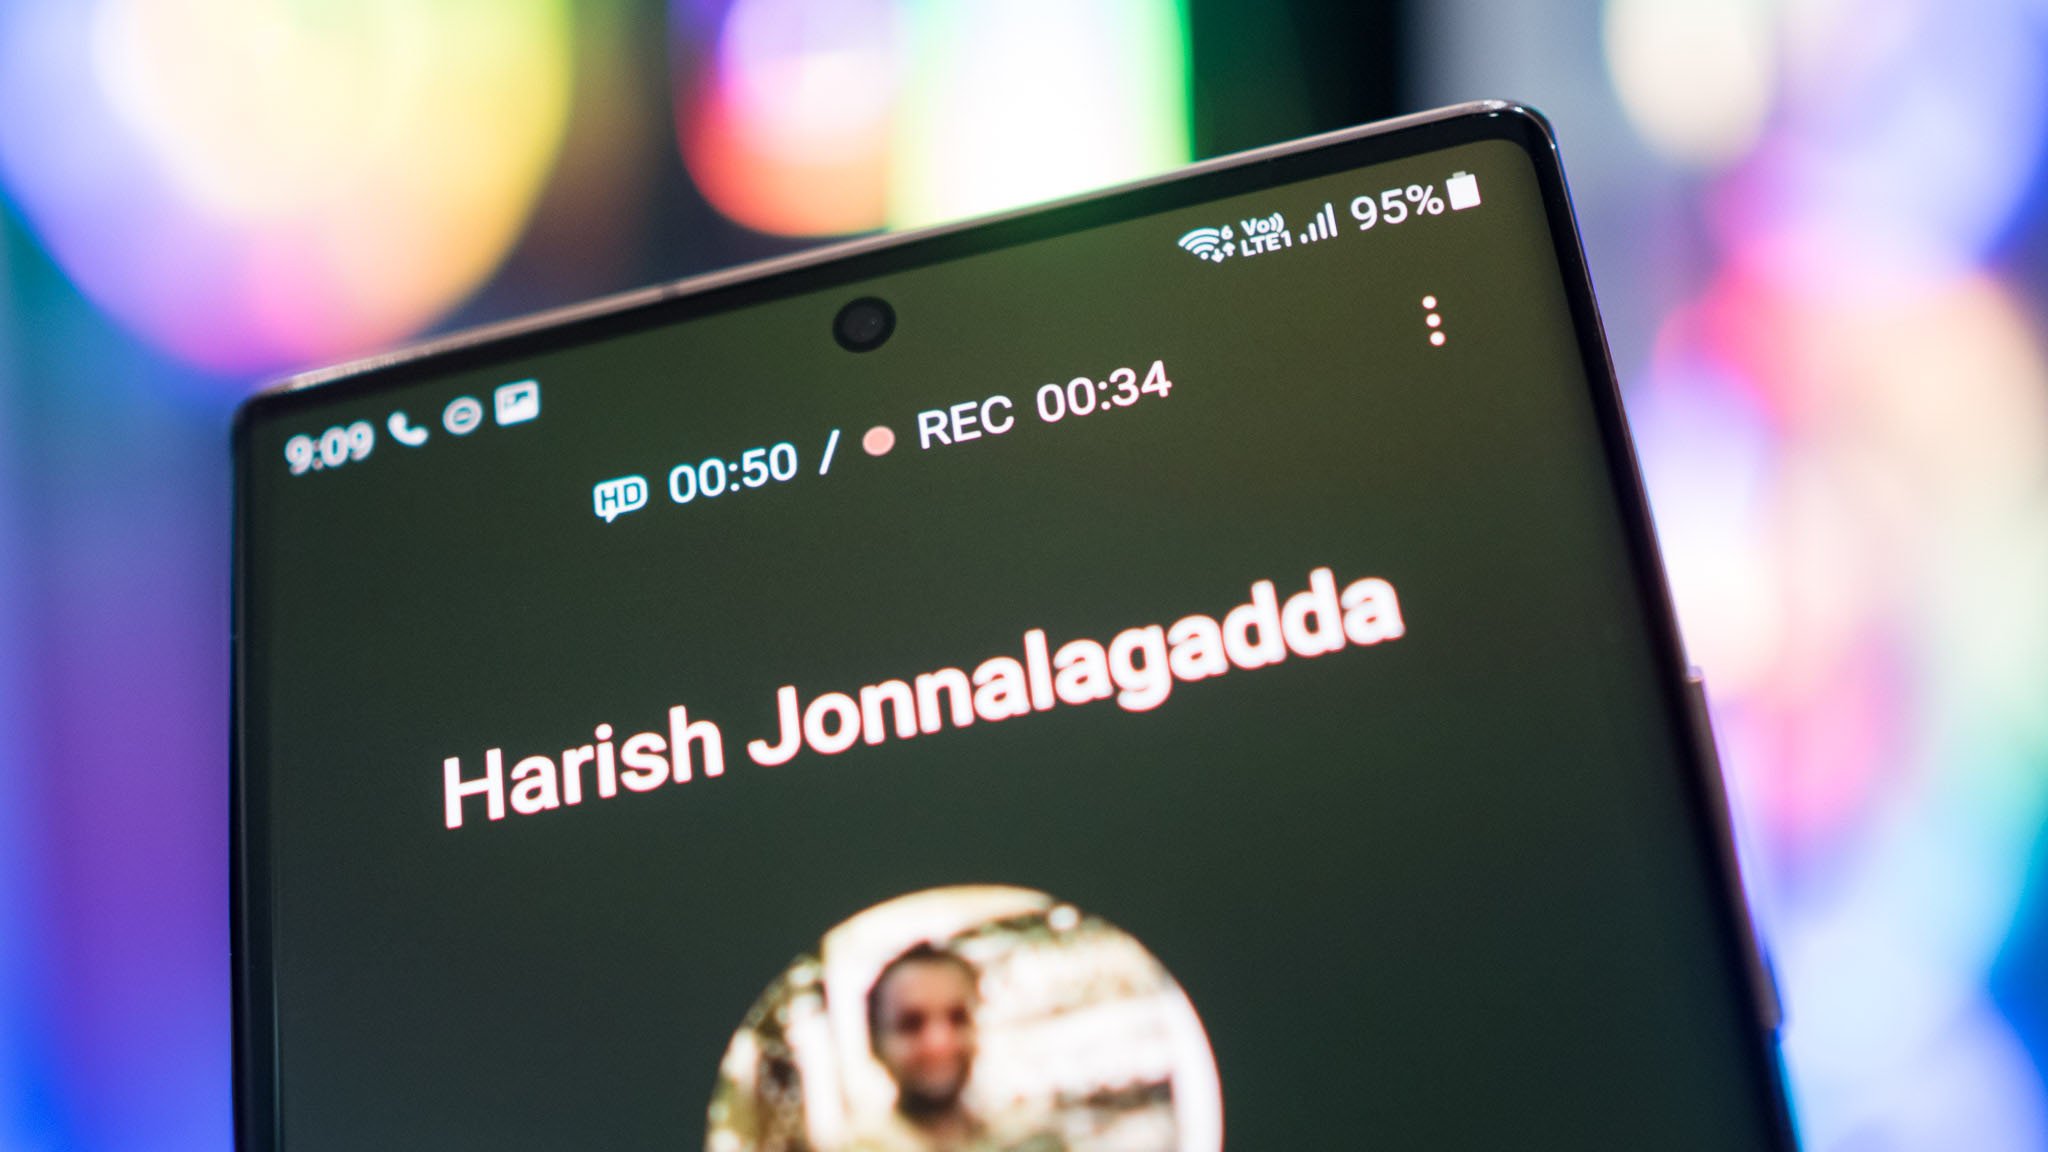 How to record a phone call on Android